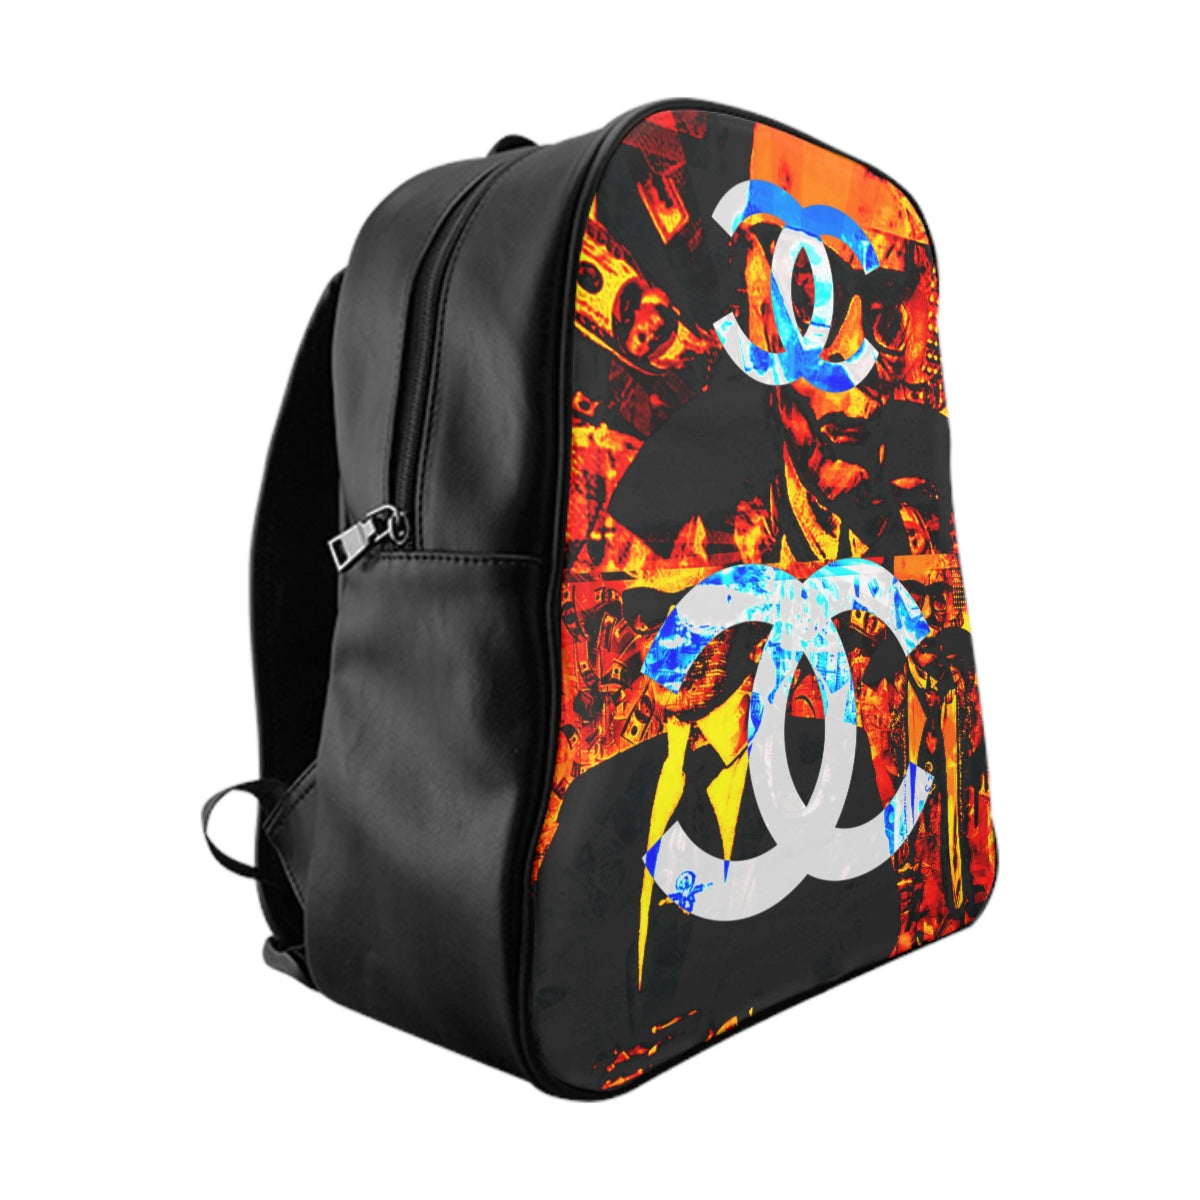 Getrott Inspired by C h a n e l Graffiti Red School Backpack Carry-On Travel Check Luggage 4-Wheel Spinner Suitcase Bag Multiple Colors and Sizes